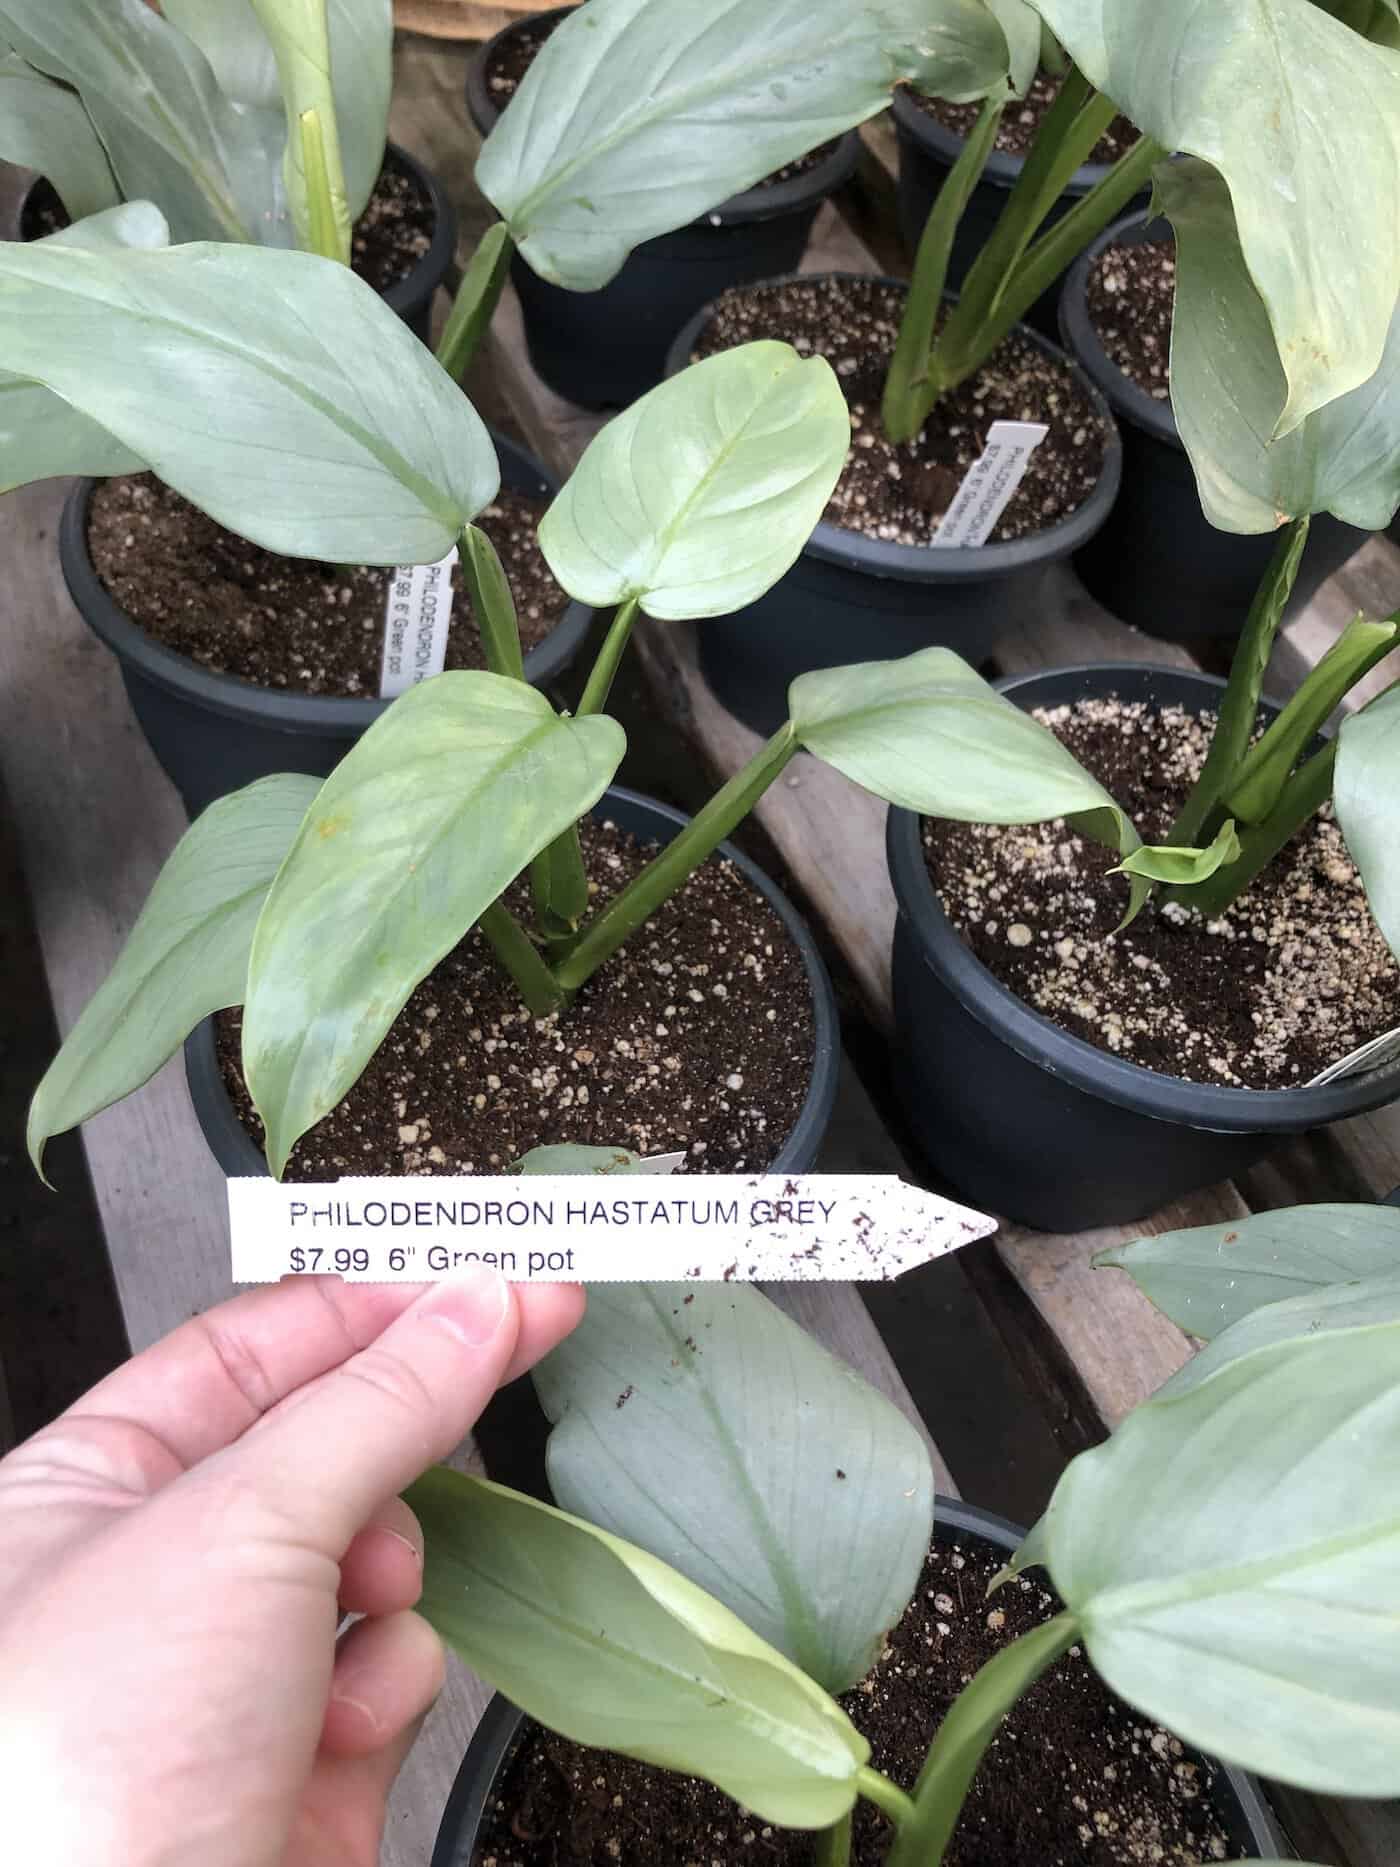 Choosing philodendron plants